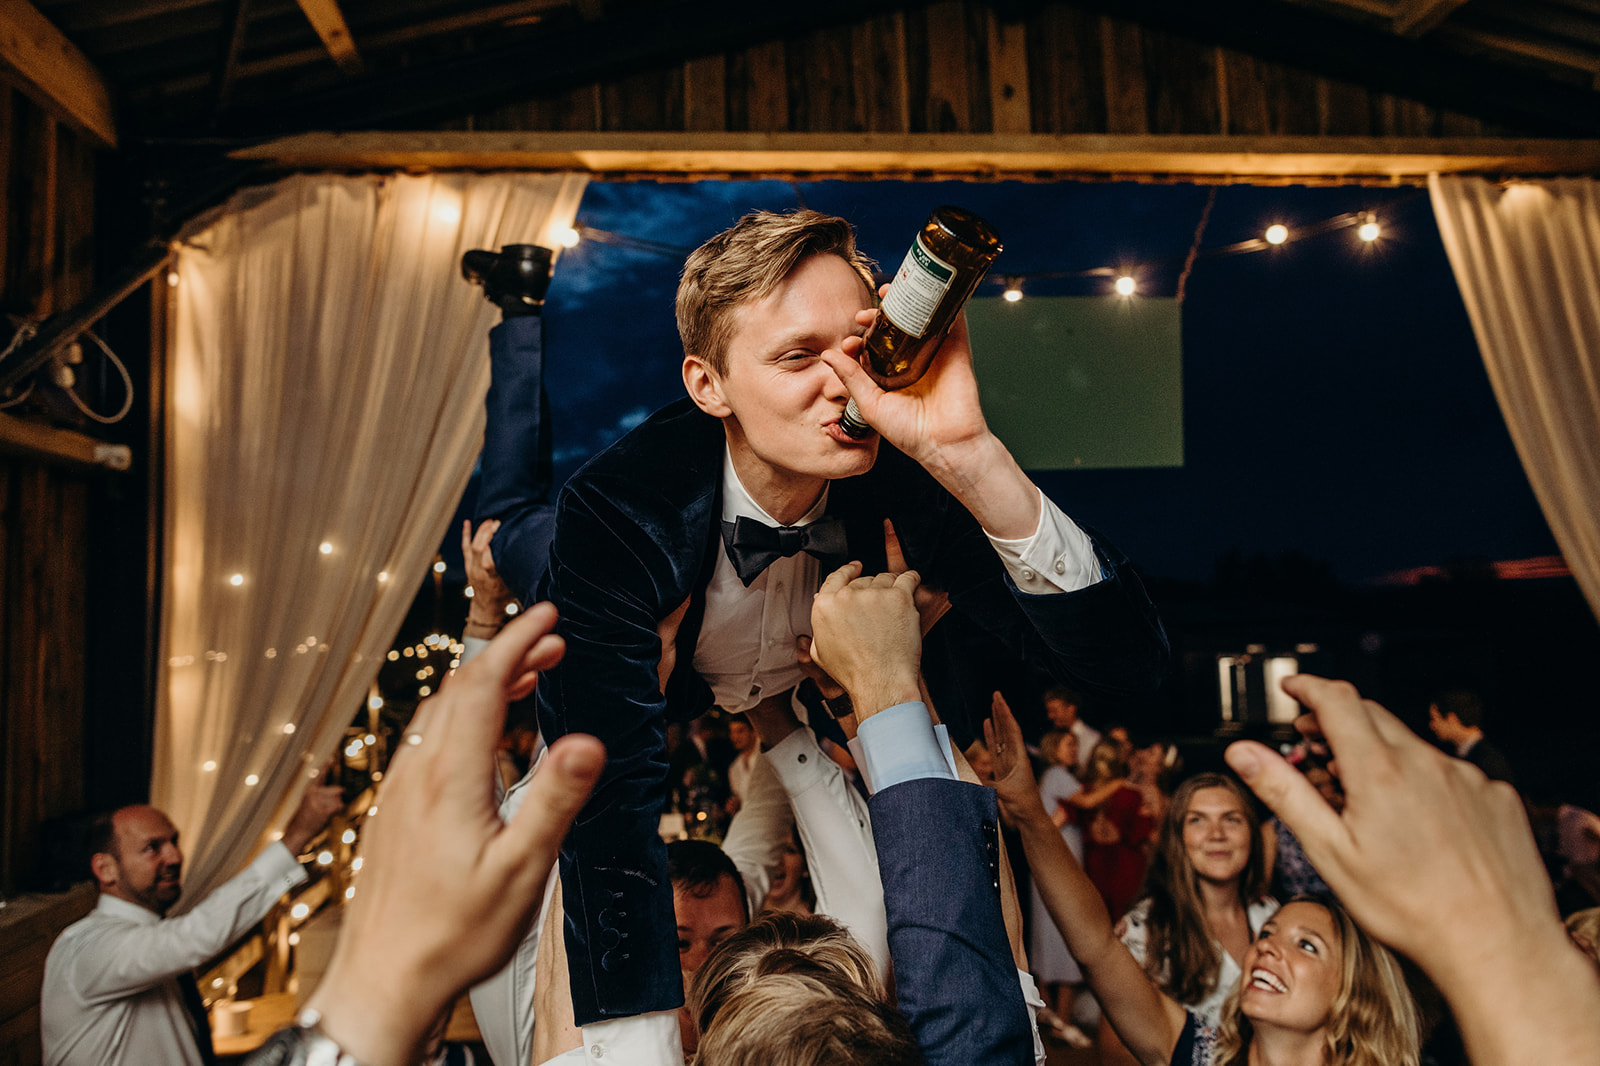 Documentary style wedding image depicts a groom, held aloft by guests, drinking from a bottle as onlookers applaud 